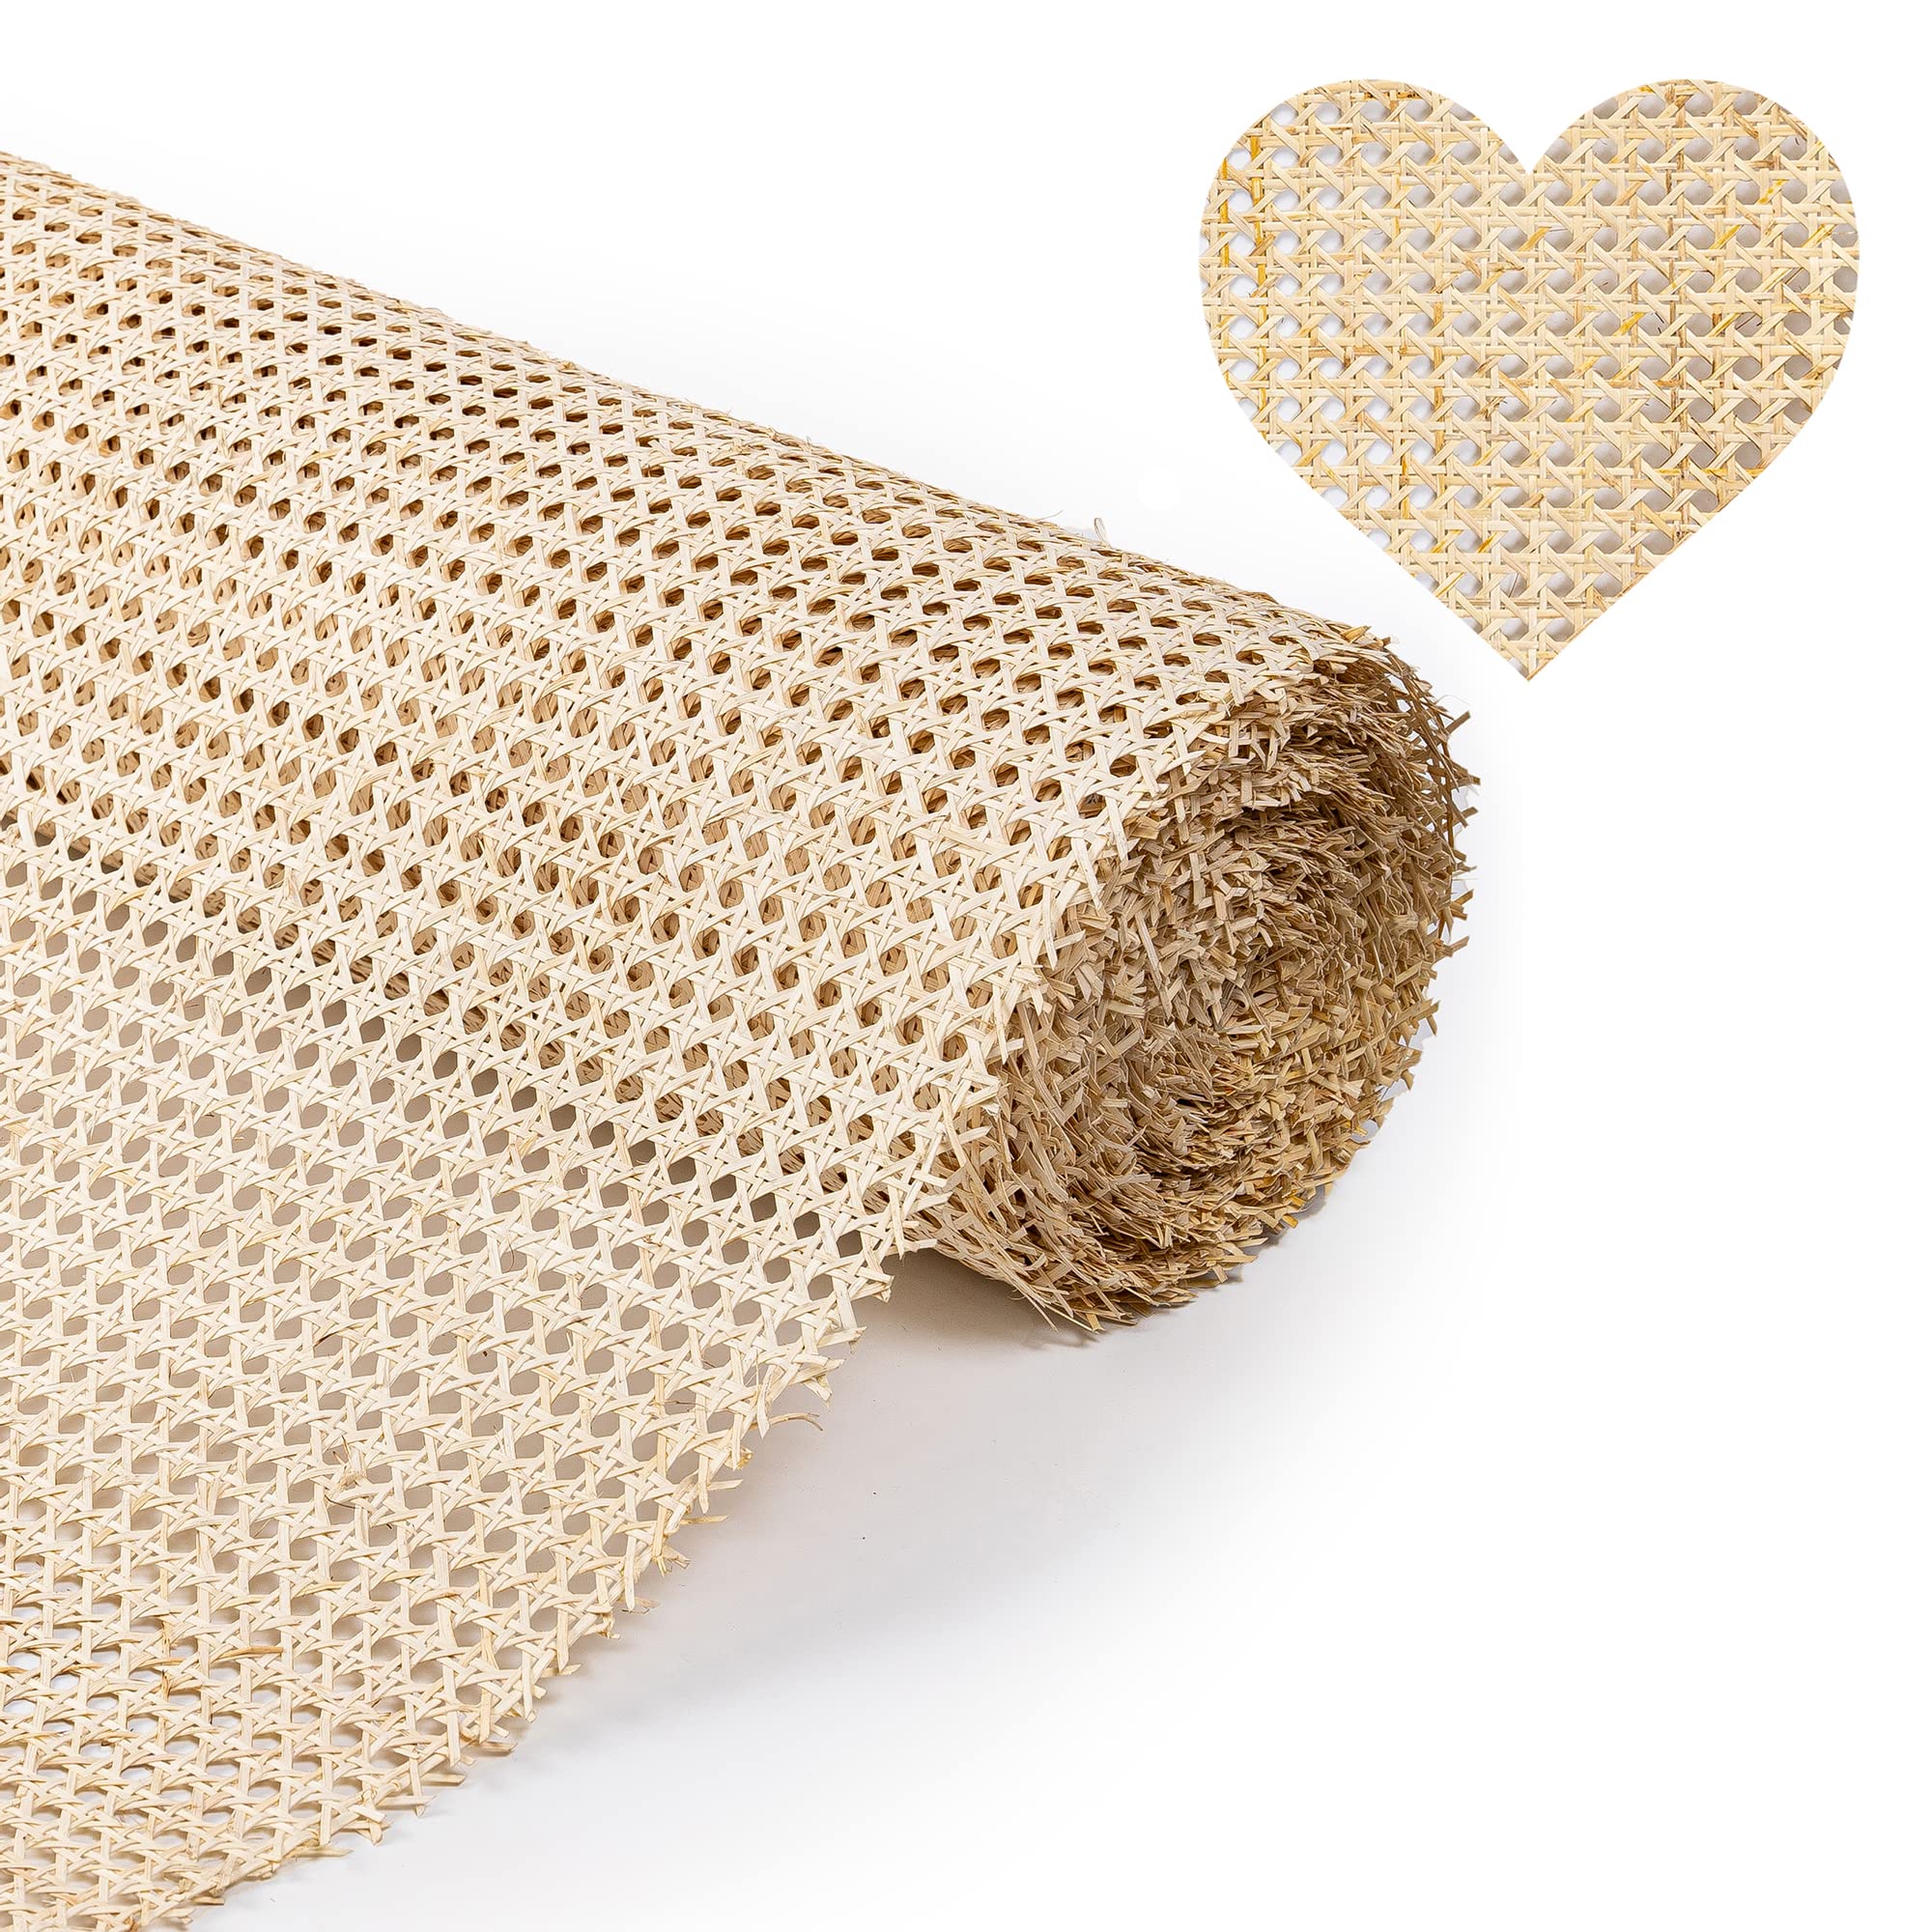 18 Width Rattan Cane Webbing Roll 9 Feet Hexagon Weave Rattan Fabric  Furniture Woven Rattan Sheets for Crafts Cane Weave Rattan Material Natural  Chair Caning Supplies Wicker (9 Feet)